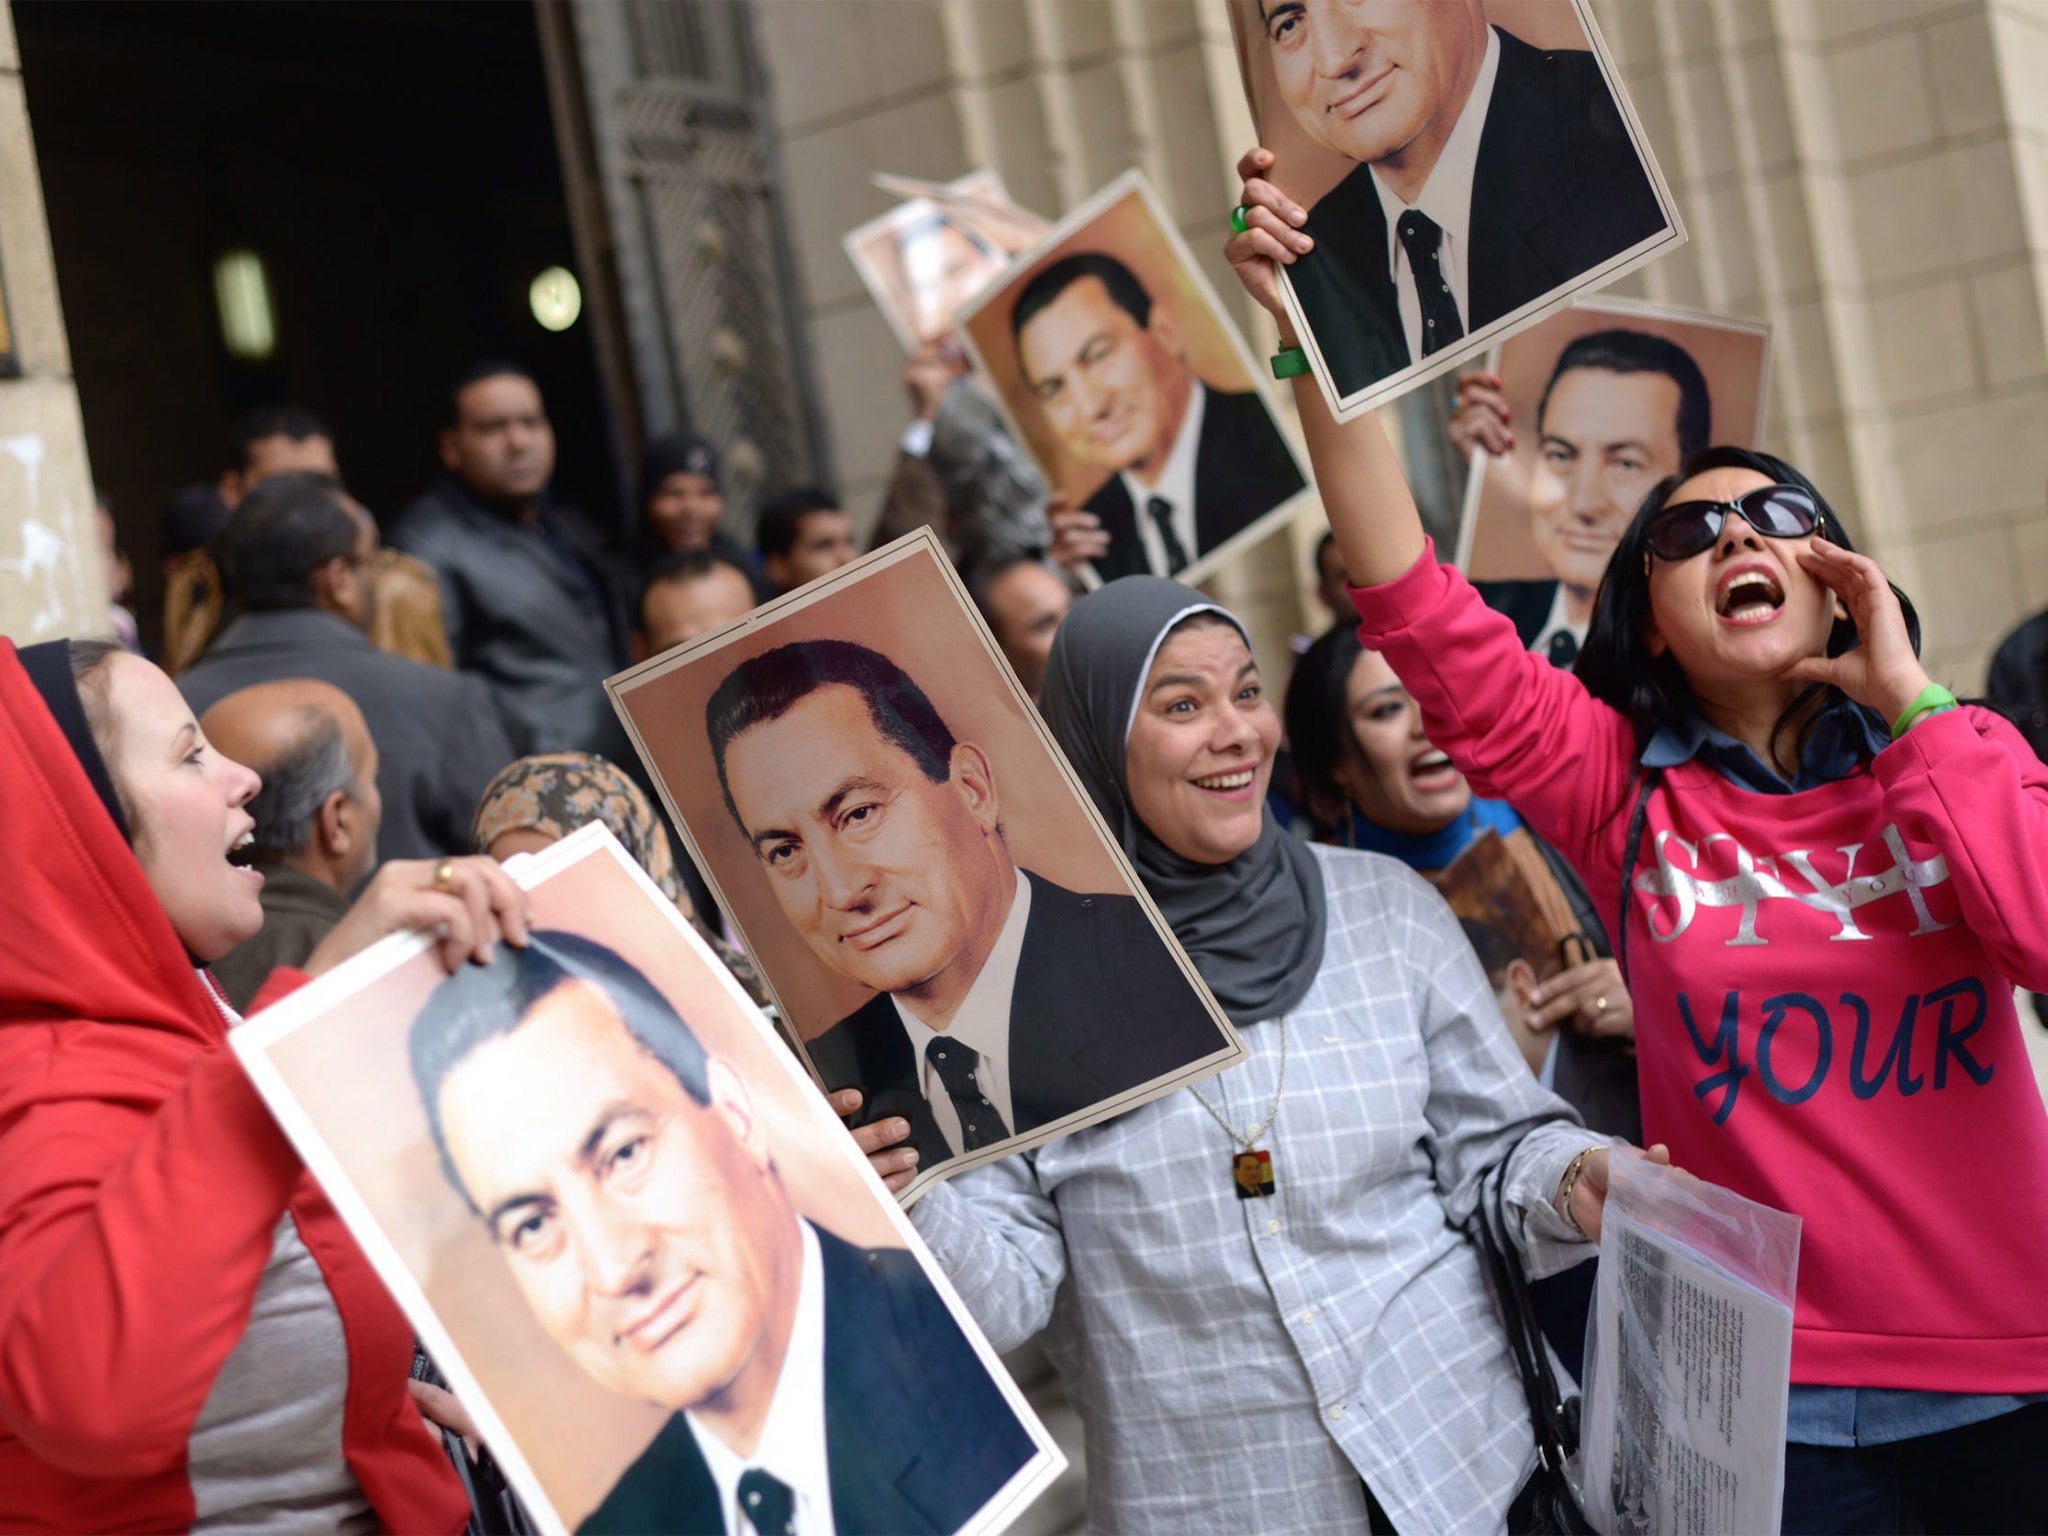 Supporters of Hosni Mubarak celebrate after a court in Cairo overturned his conviction in an embezzlement case